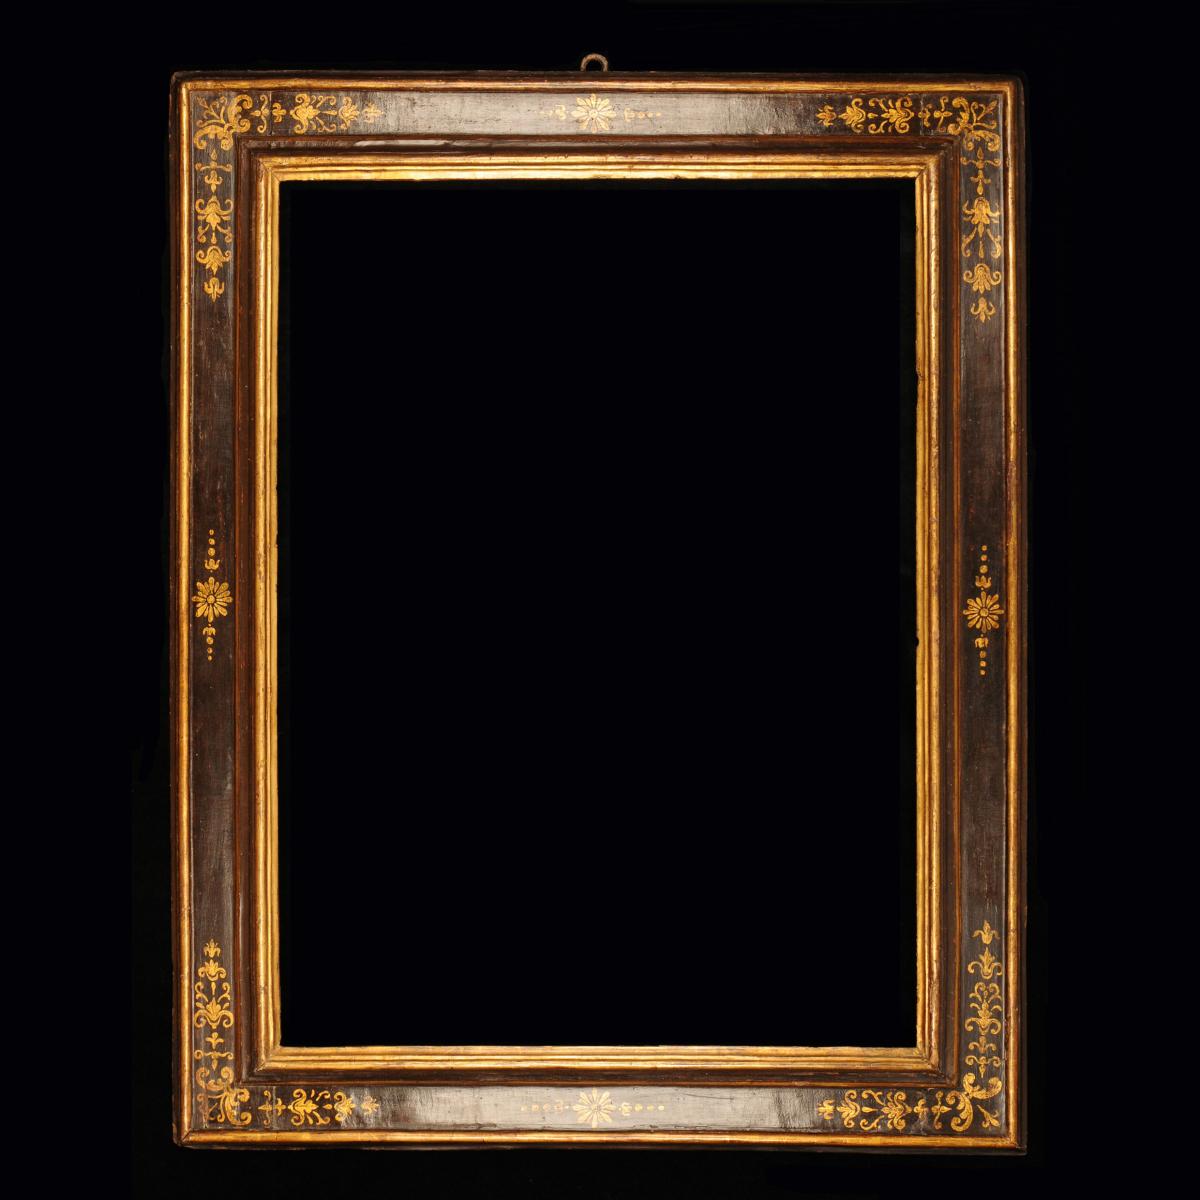 Italian, circa 1600, gilded and painted black/brown cassetta frame